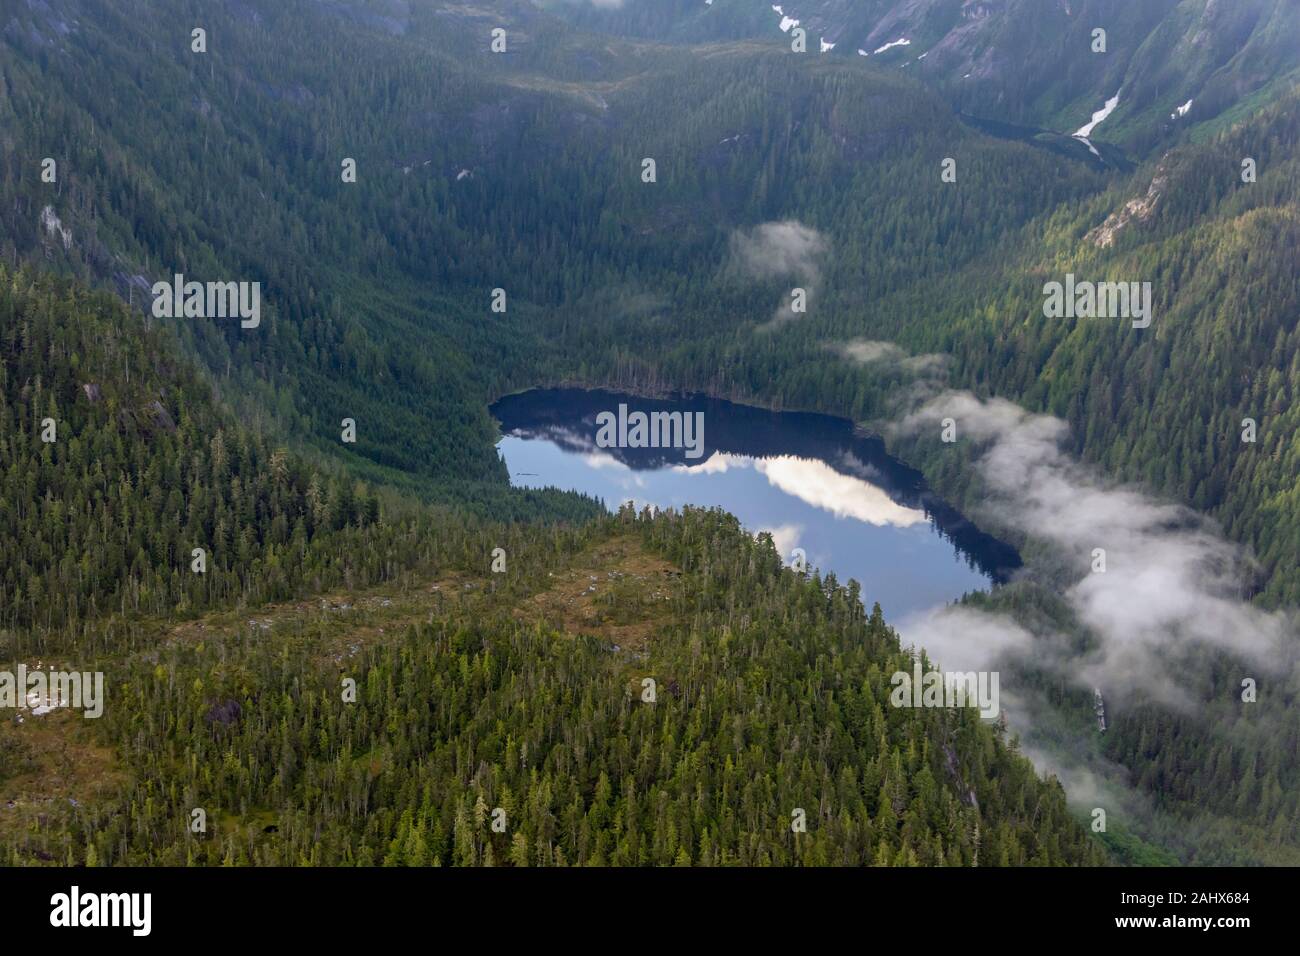 Mountain lake with reflections and morning mists, Great Bear Rainforest, coastal British Columbia Stock Photo